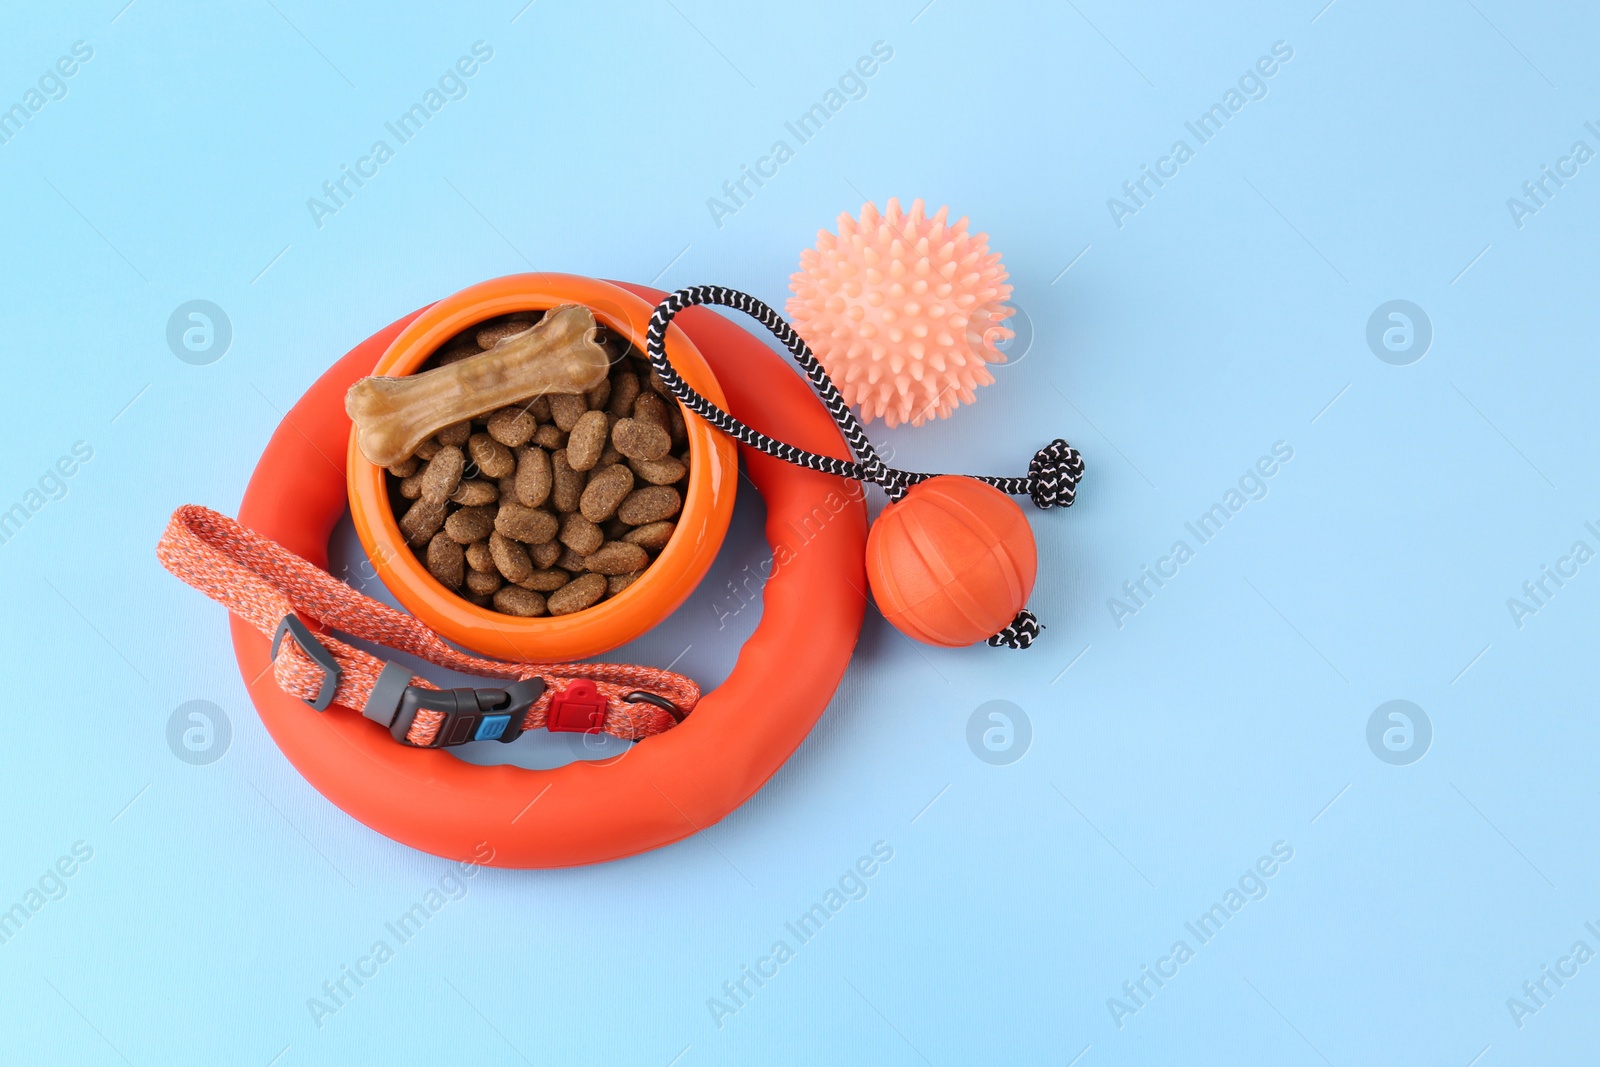 Photo of Dry pet food and toys on light blue background, flat lay with space for text. Shop items